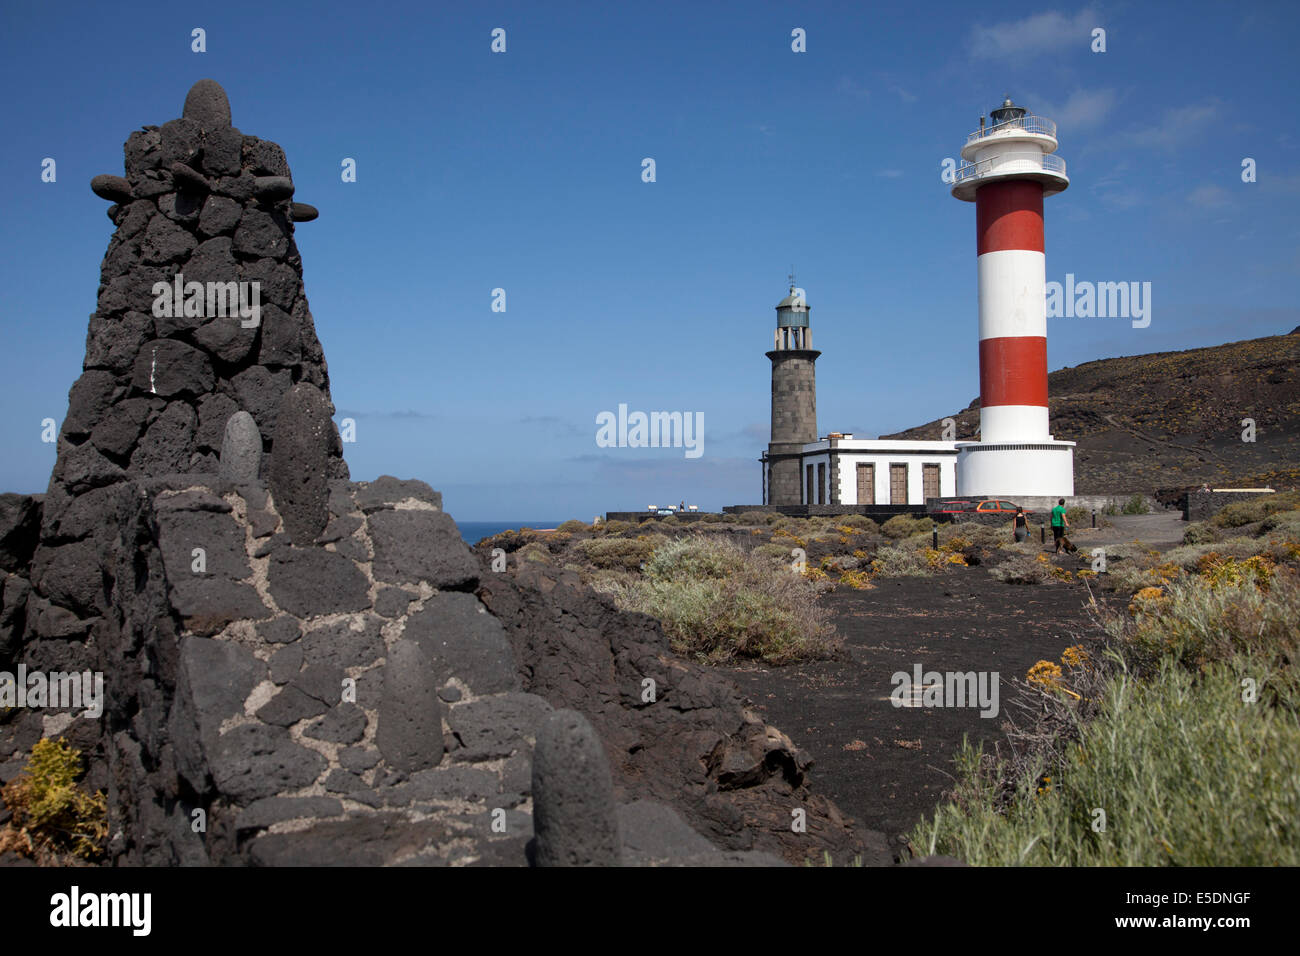 old and new Lighthouse at the Punta de Fuencaliente, La Palma, Canary Islands, Spain, Europe Stock Photo